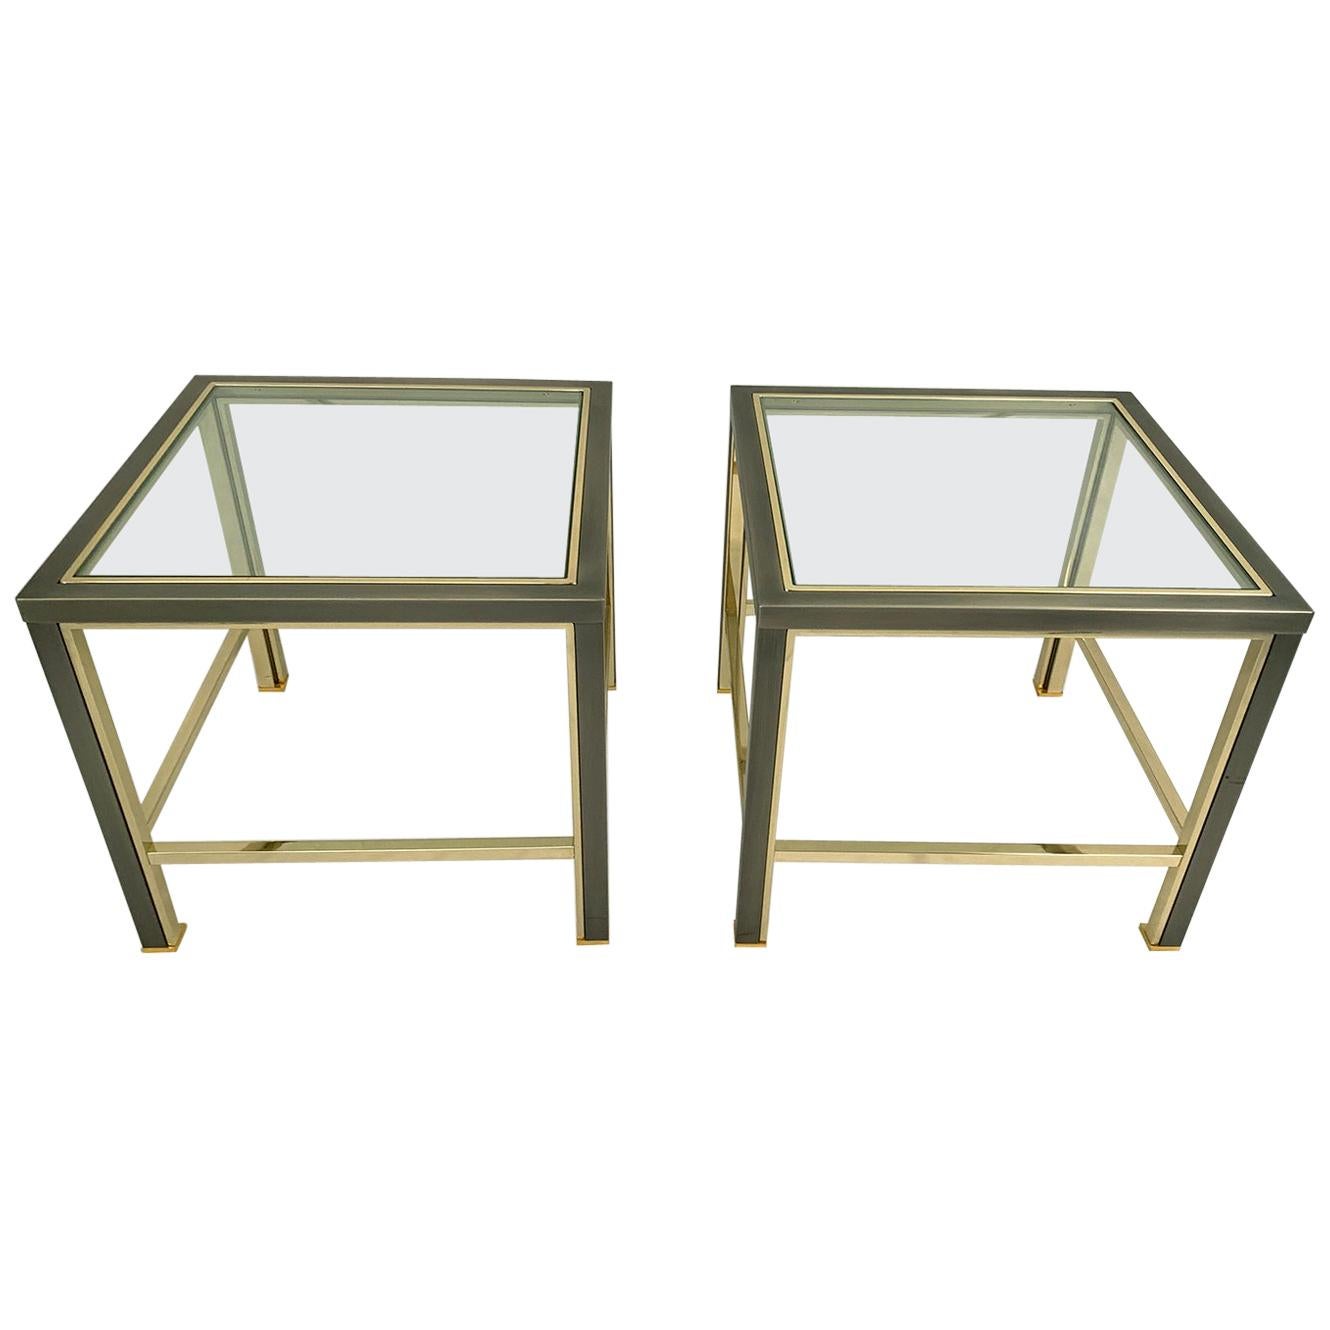 Pair of Brushed Steel and Brass Side Tables from Belgo Chrome, 1980s